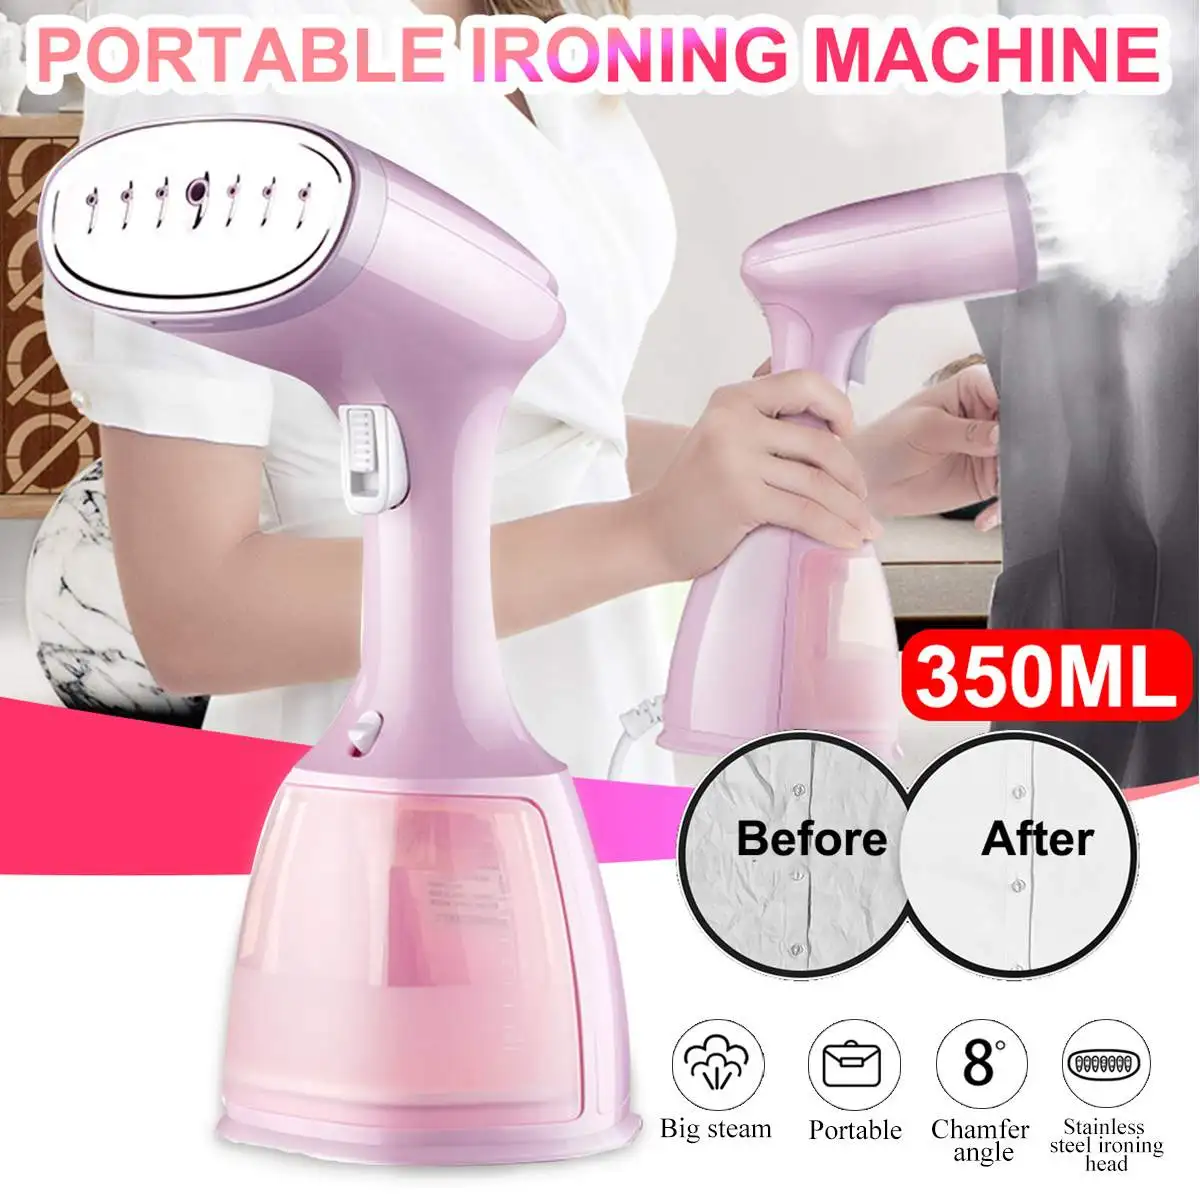 

Warmtoo 1500W 350ml Steam Iron Garment Steamer Handheld Fabric Travel Vertical Mini Portable Home Travelling Clothes Ironing